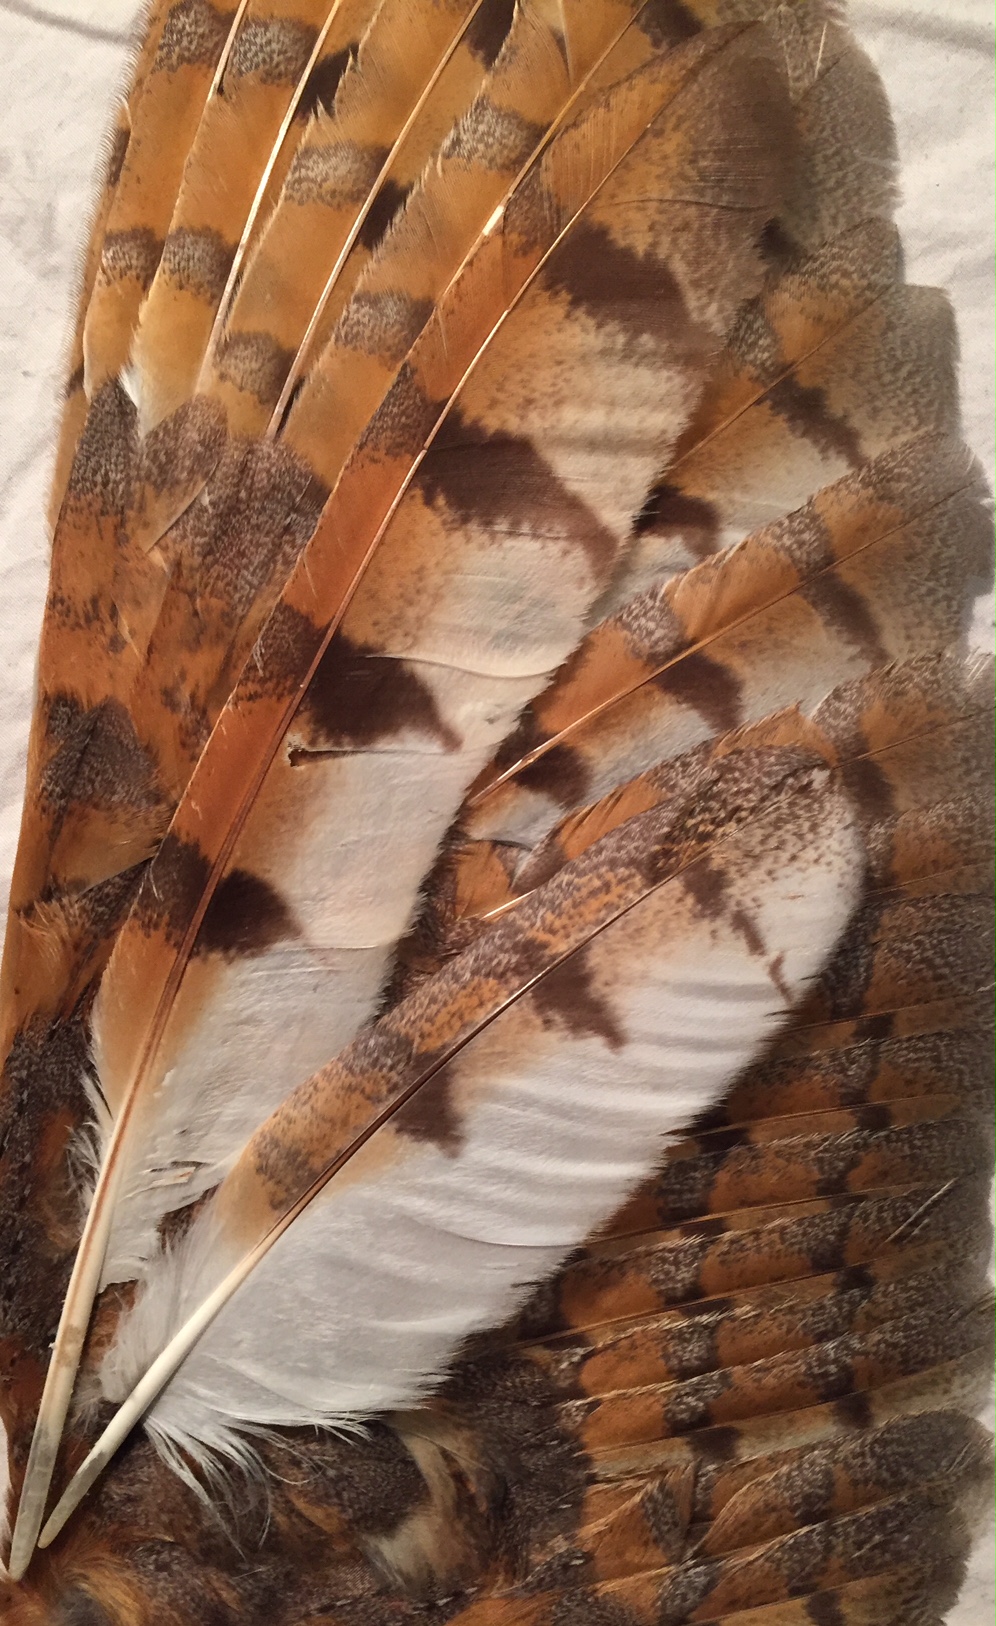 Barn Owl Feathers by AdvidFeathers on DeviantArt